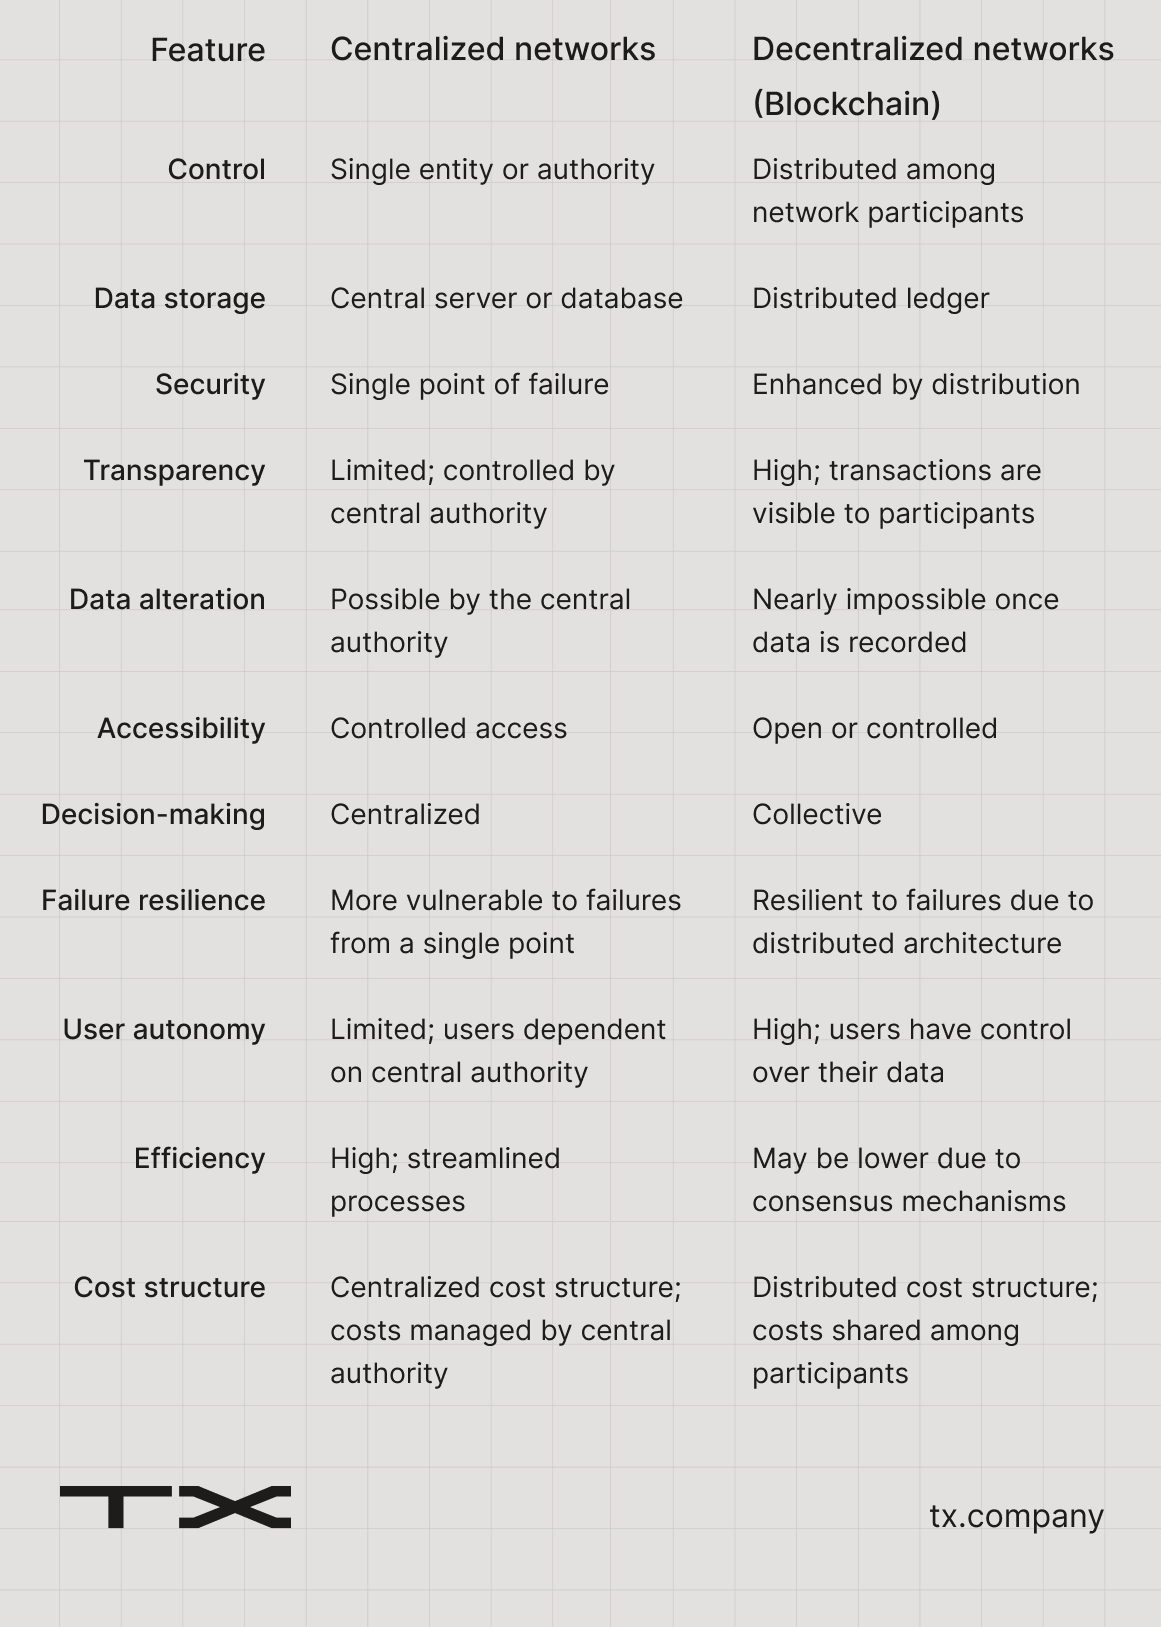 Comparison between centralized and decentralized networks.